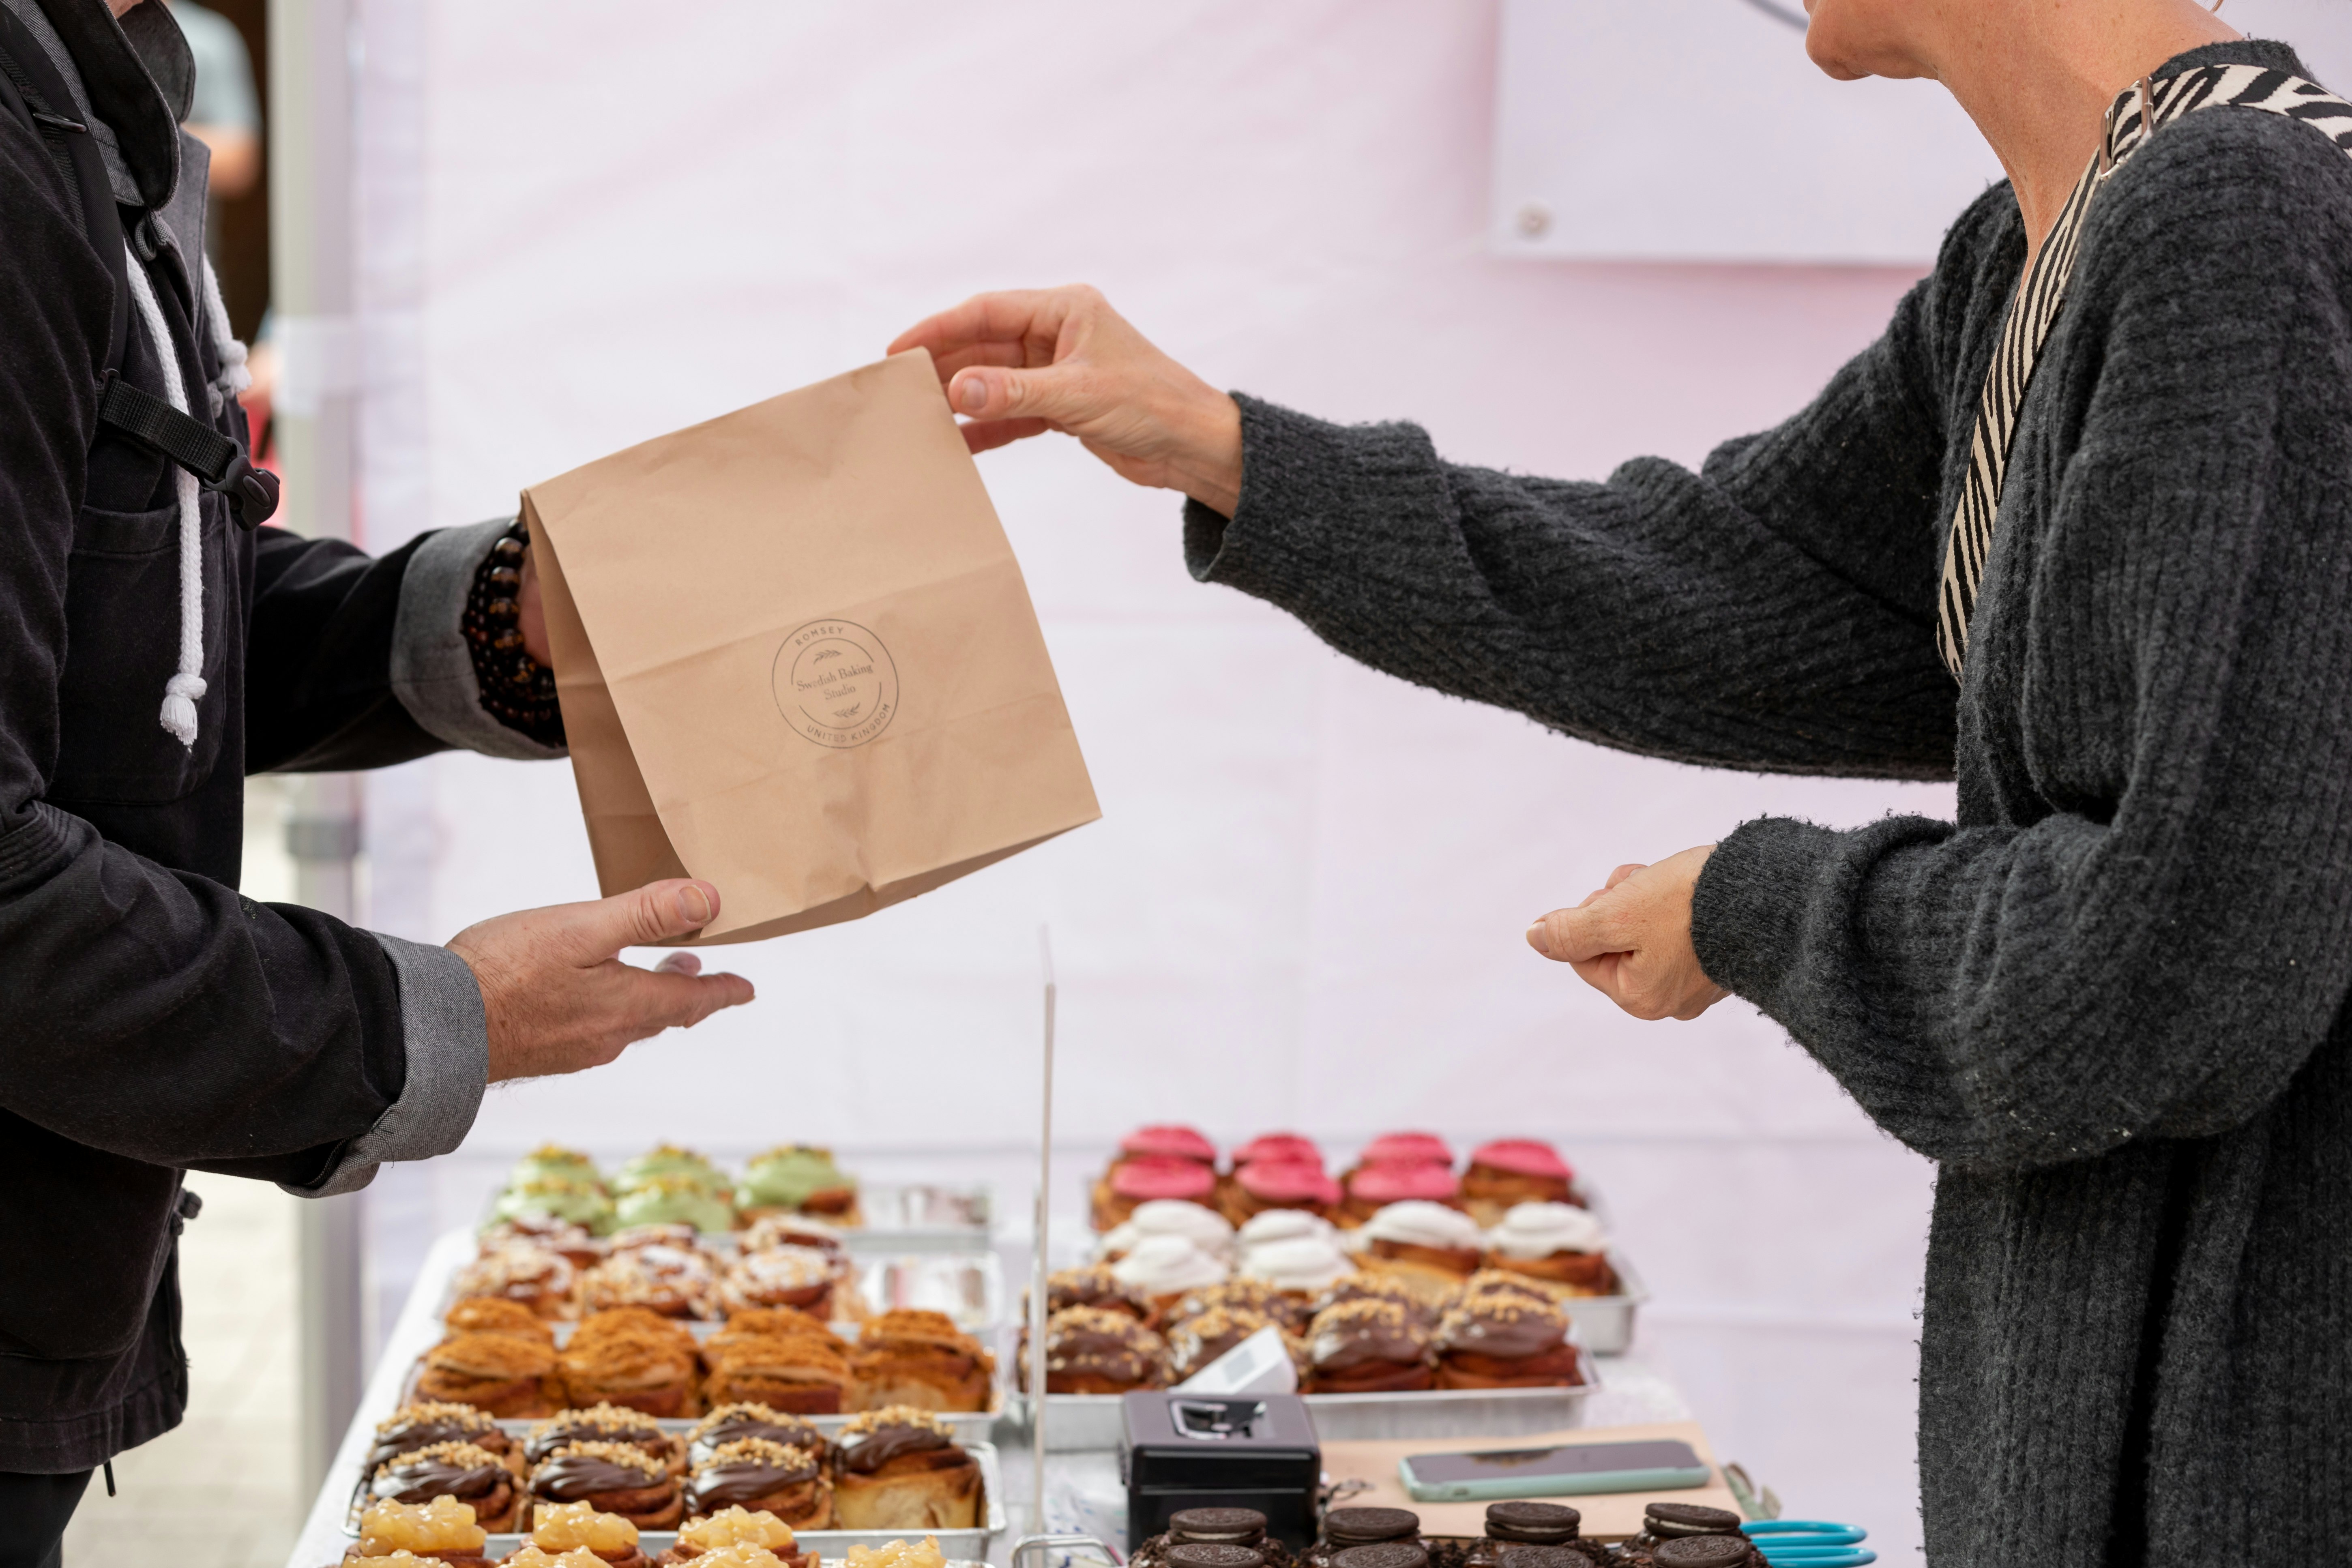 A person hands over a paper bag. Beneath are baked goods.